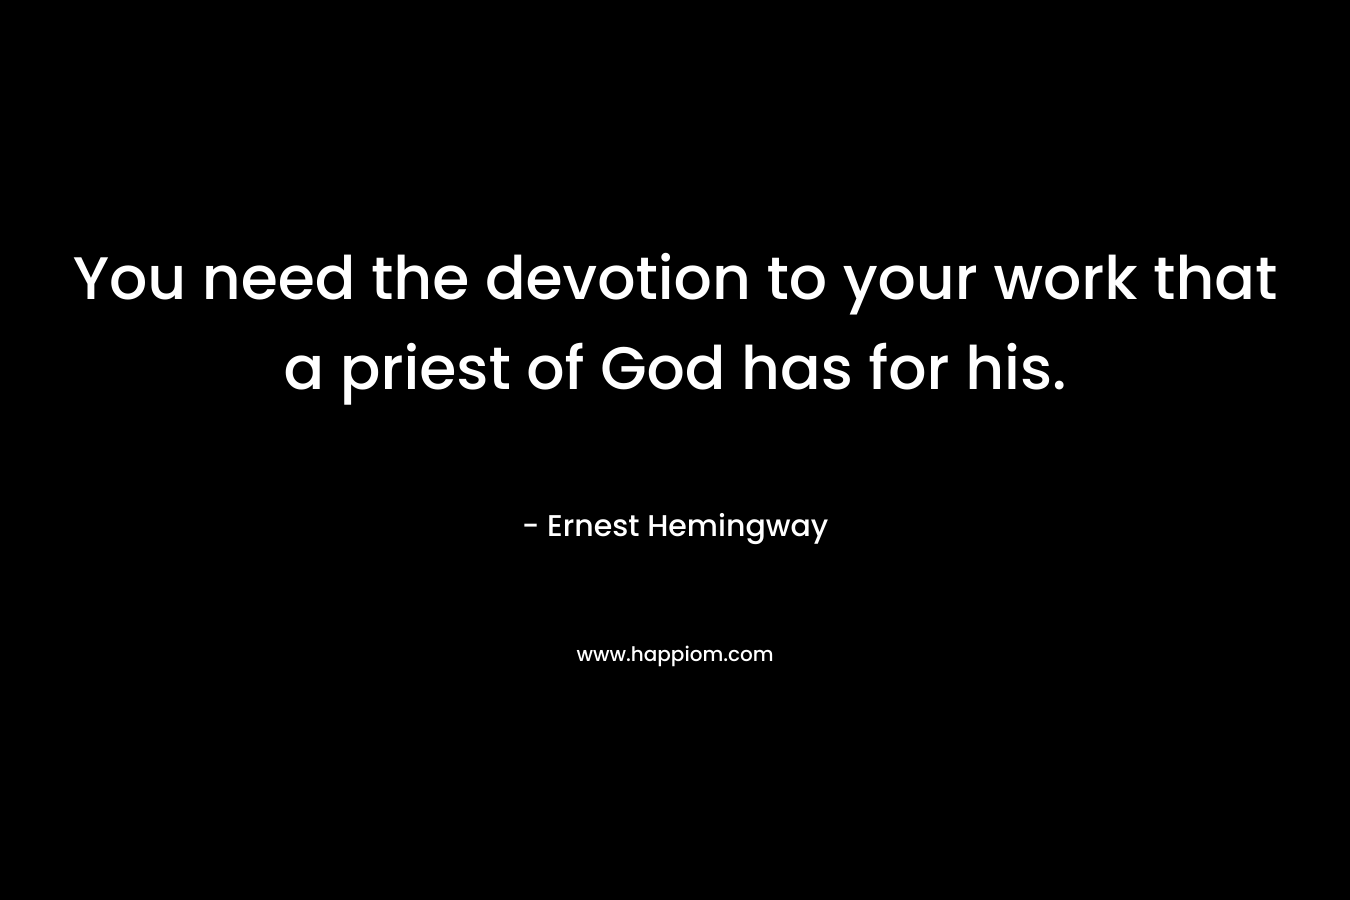 You need the devotion to your work that a priest of God has for his. – Ernest Hemingway